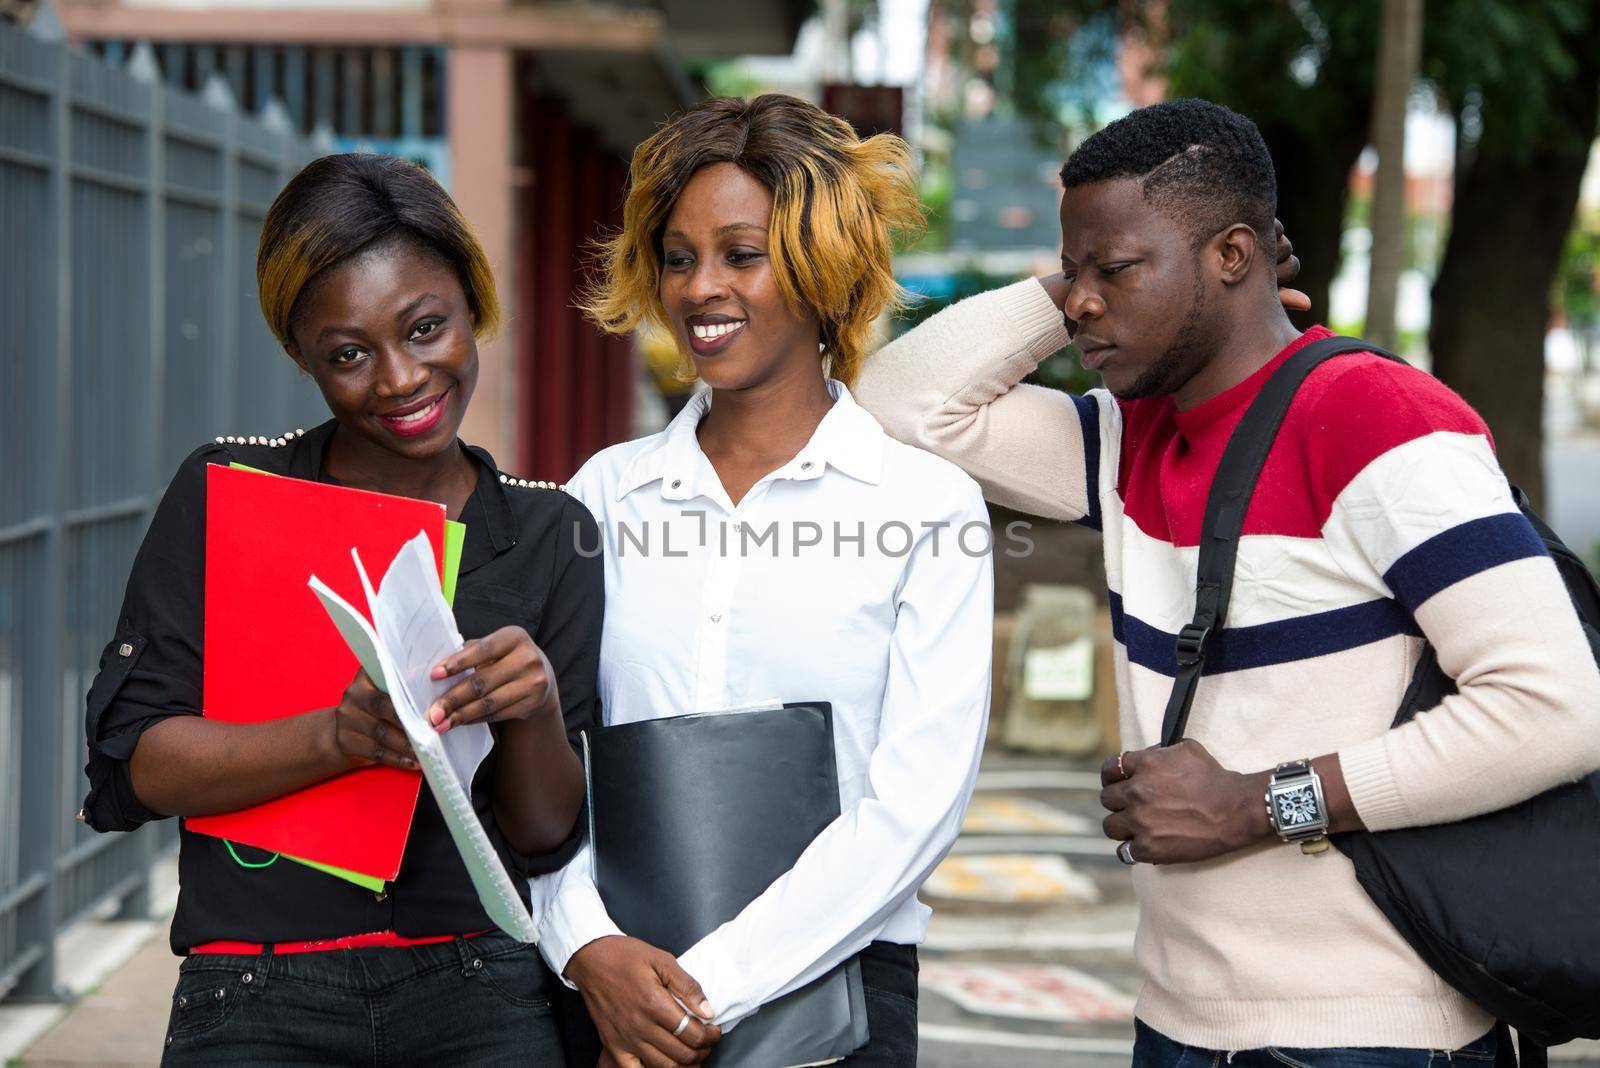 group of students standing outside after class with notebook smiling.